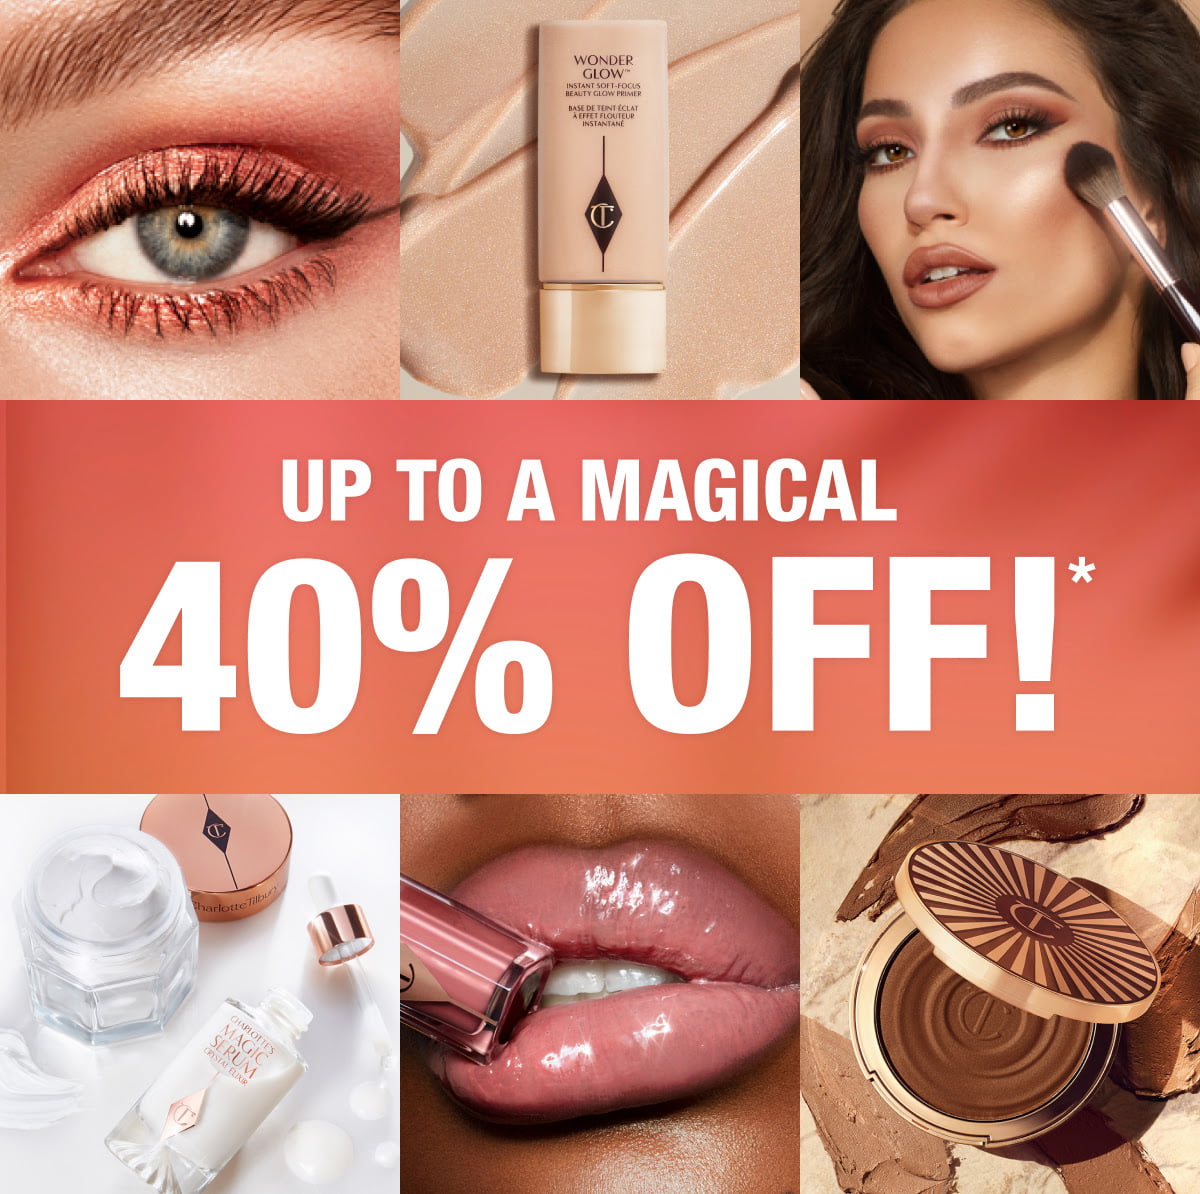 Up to 40% off Charlotte Tilbury's Beauty Kits